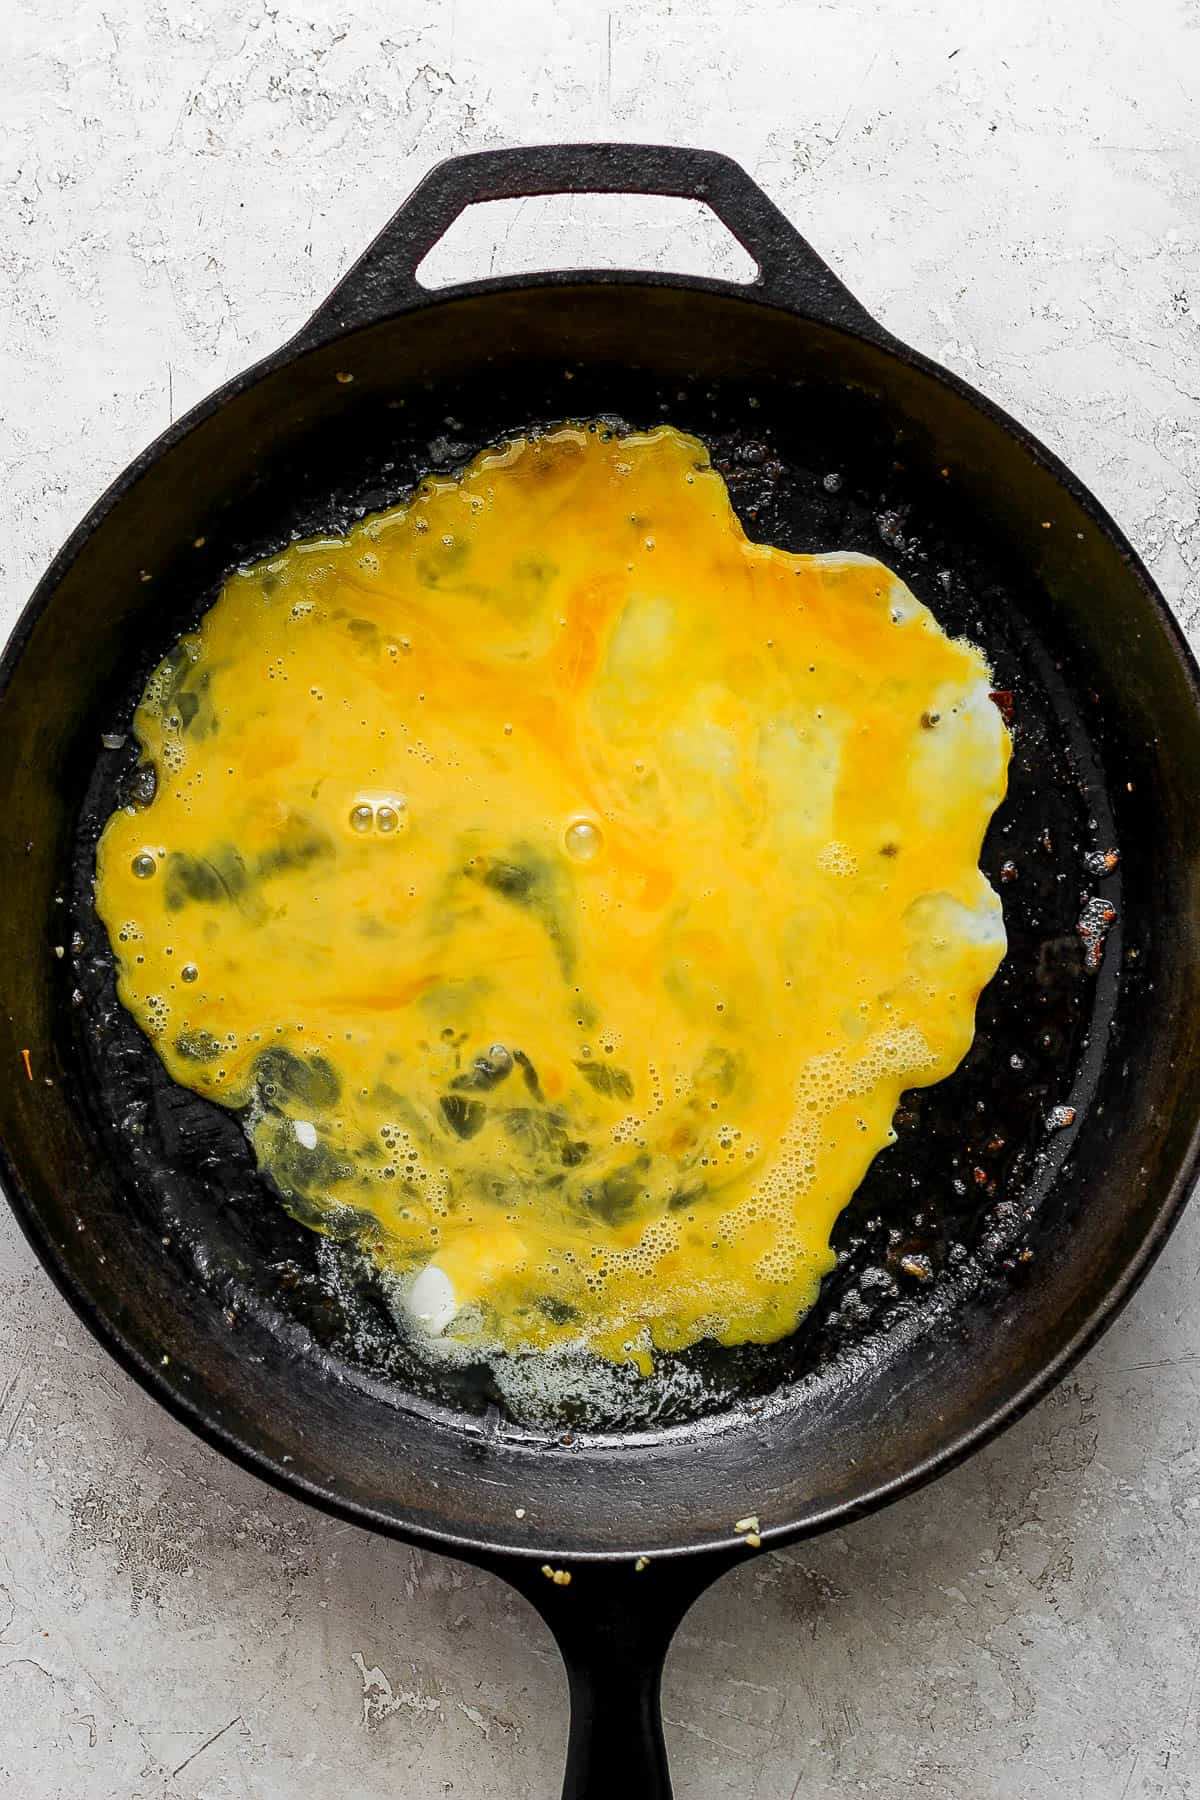 An uncooked whisked egg in the bottom of the skillet.